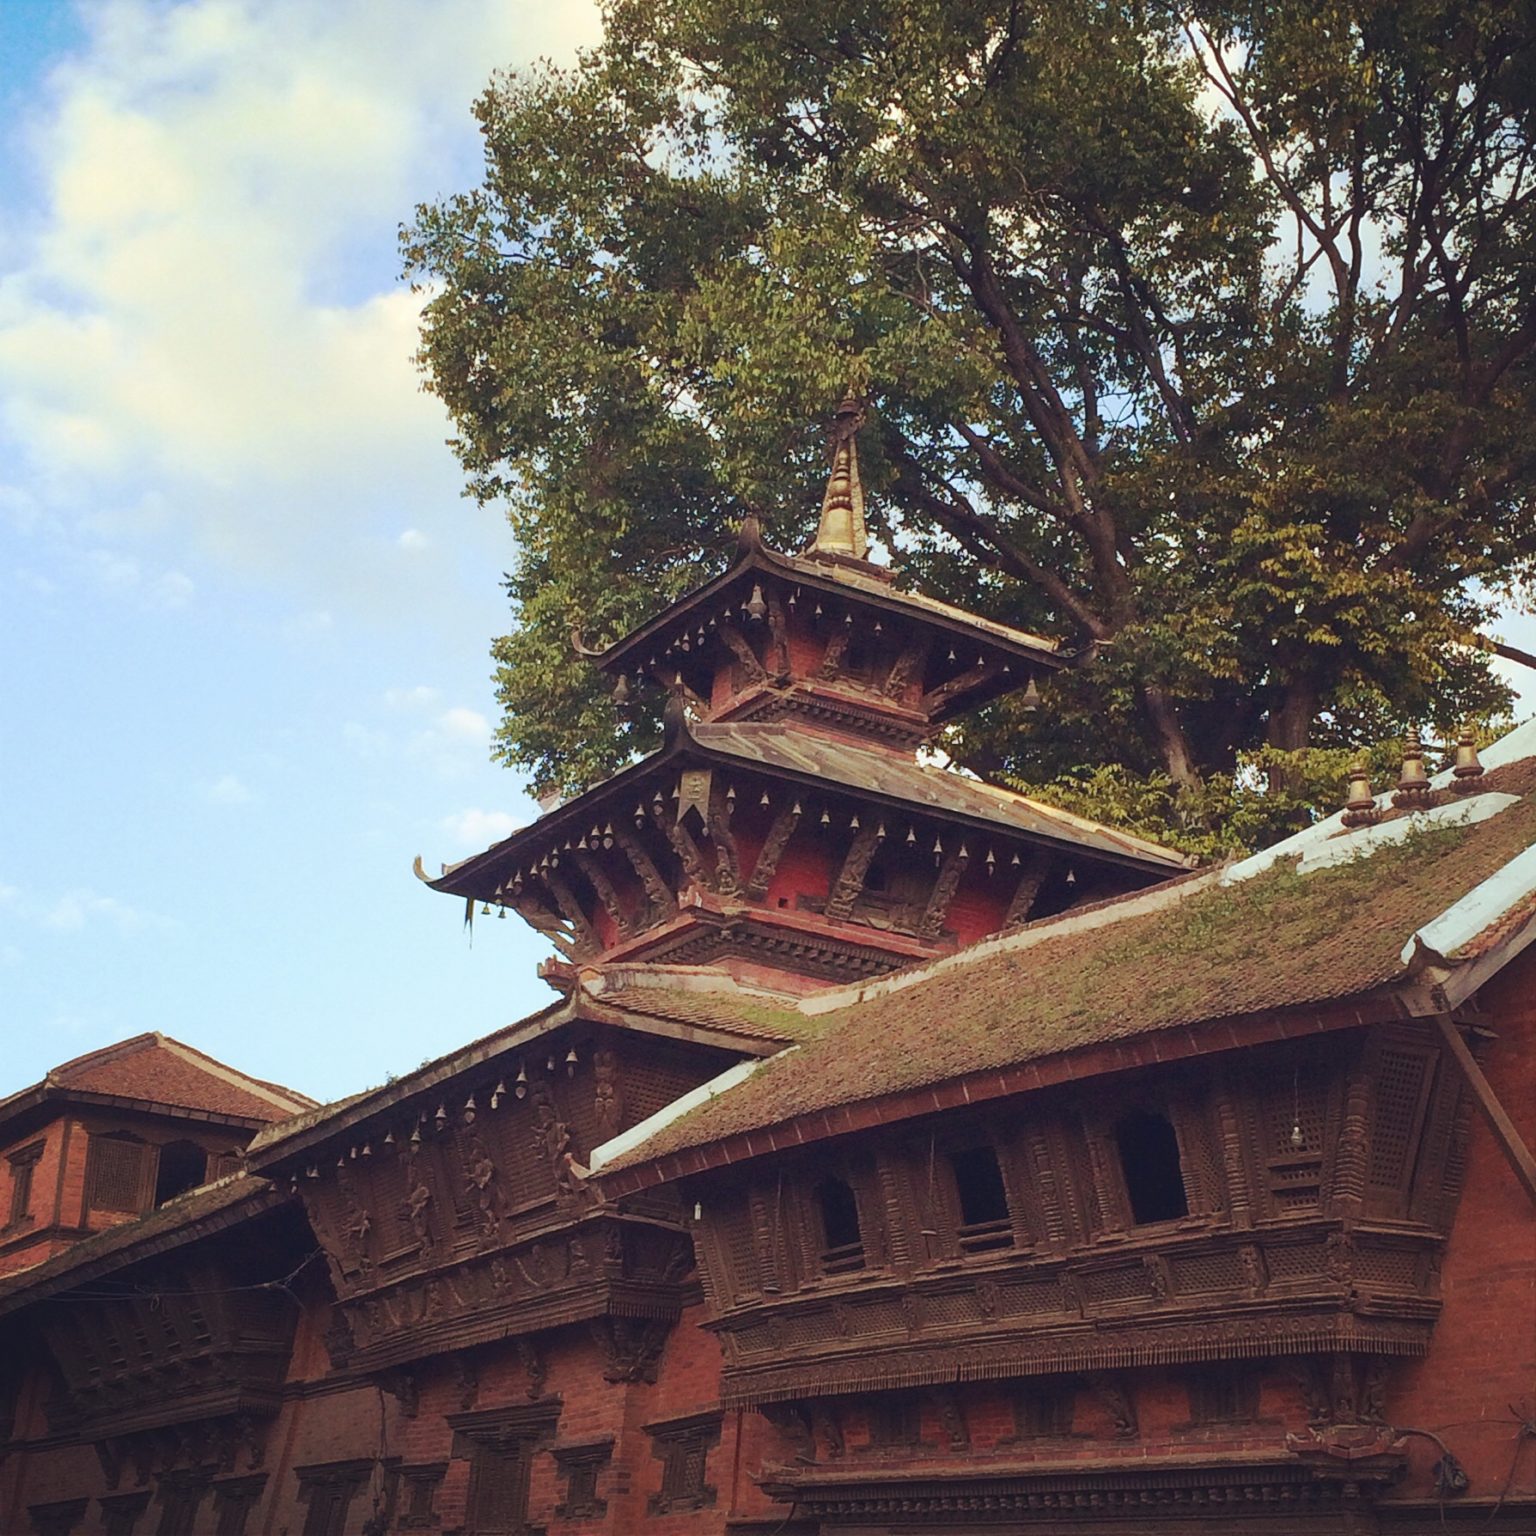 ancient wood and brick temple with a large tree above in Kathmandu